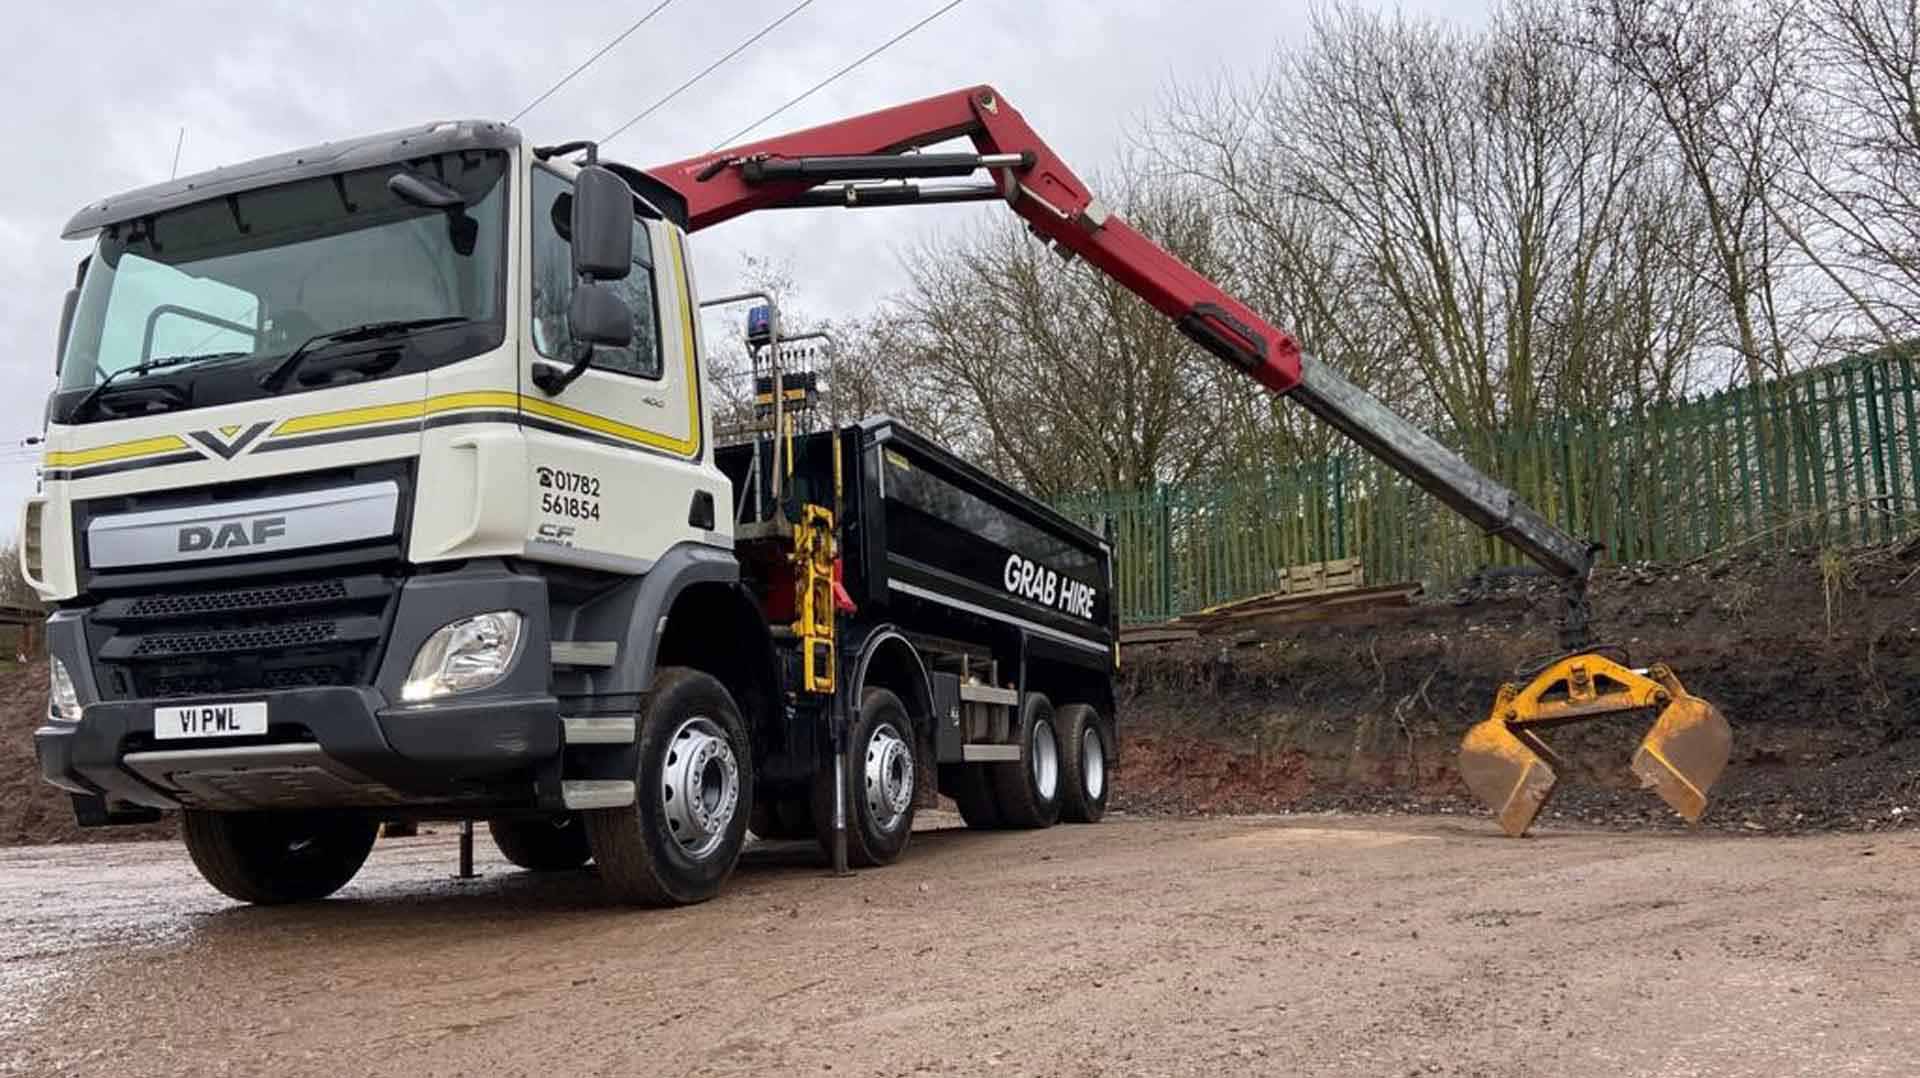 Potteries Waste Hire Newcastle under Lyme and Stoke on Trent